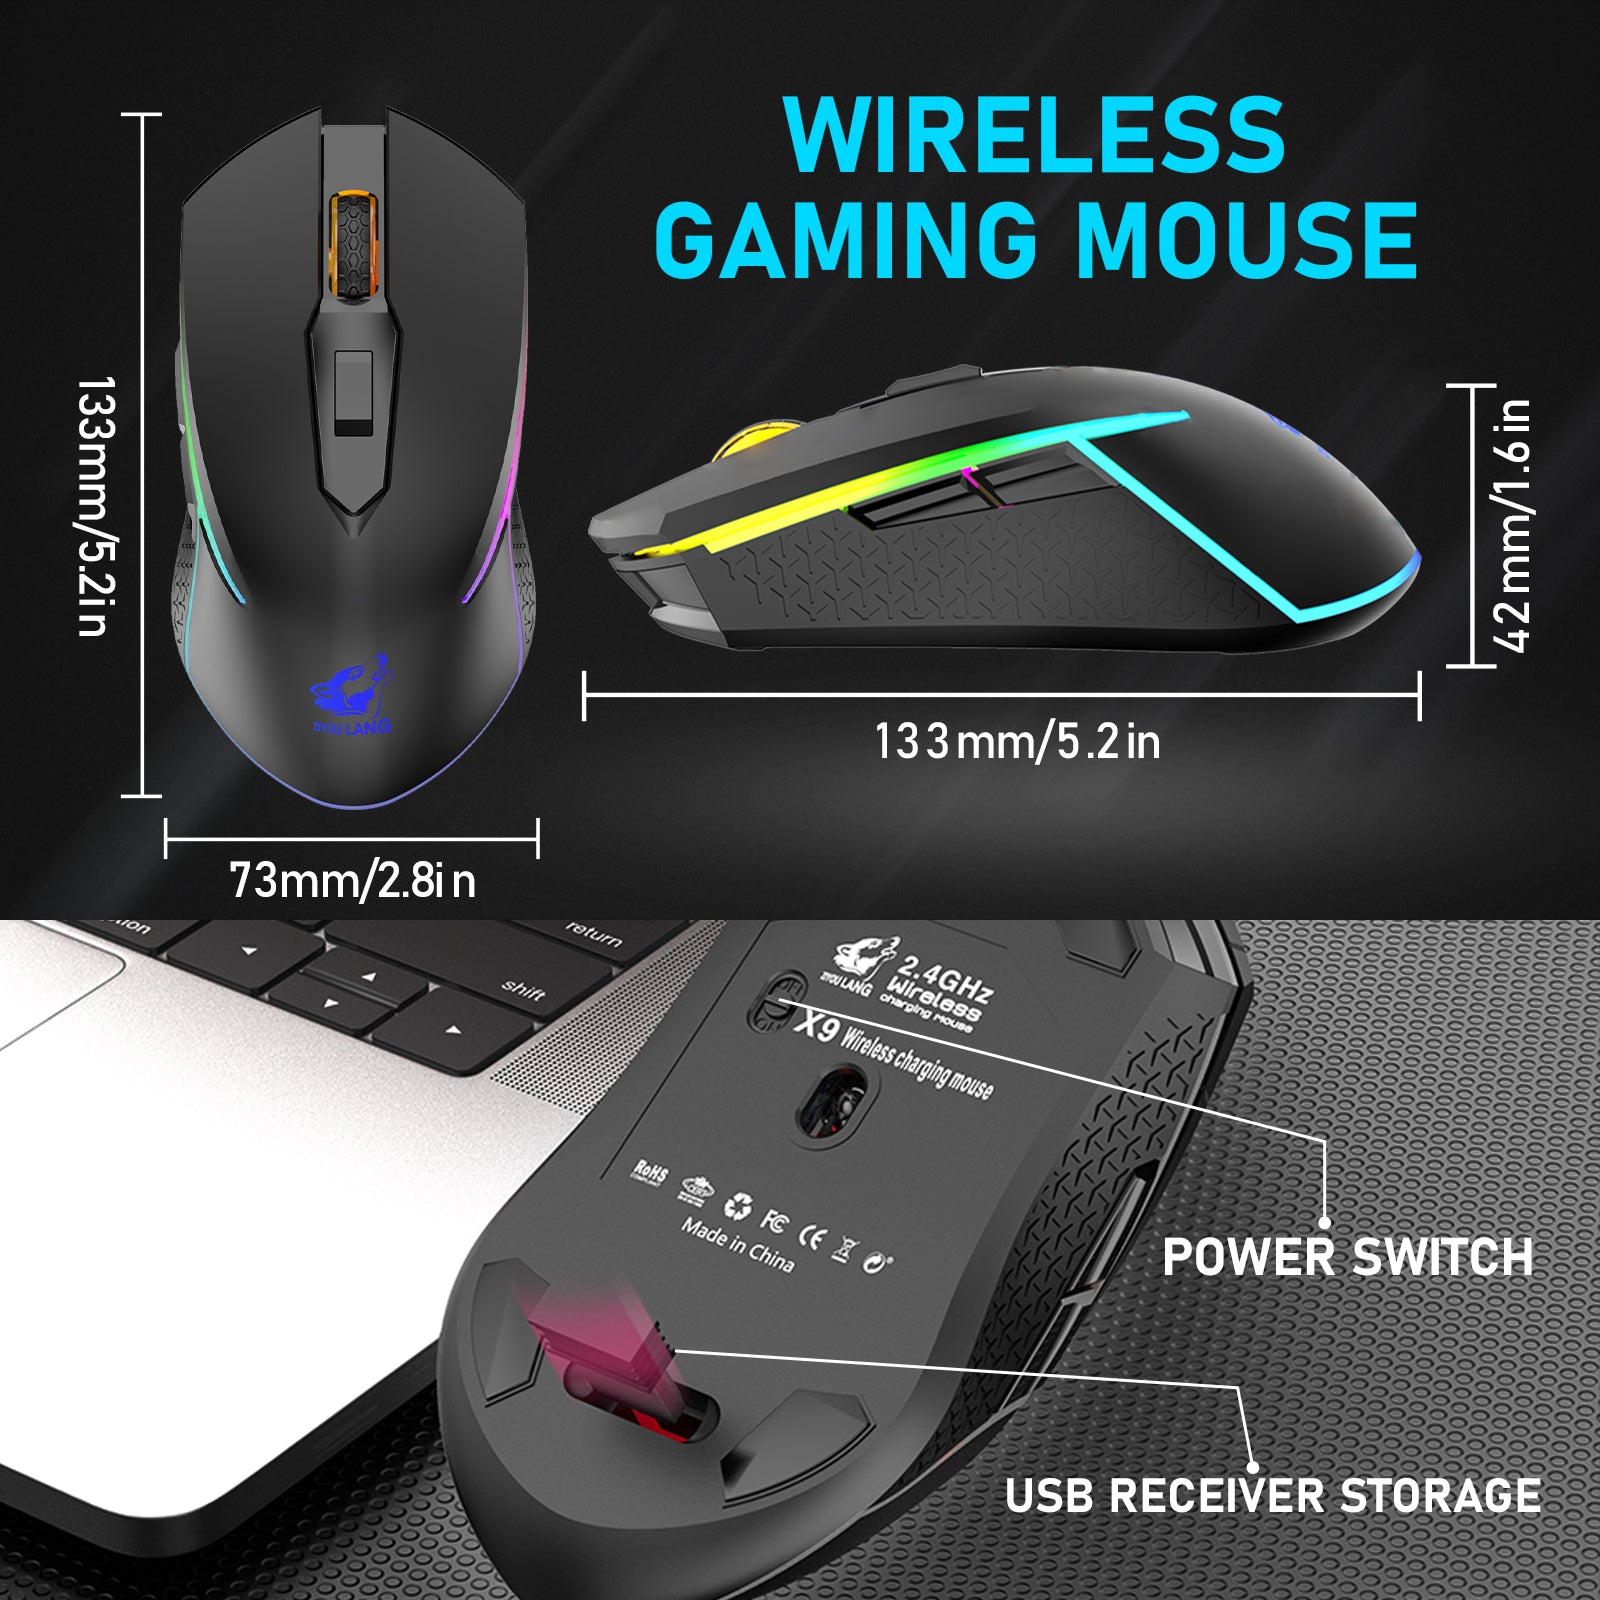 ZIYOU LANG Wireless Gaming Mouse with 2.4Ghz USB Receiver RGB Backlight Adjustable DPI Silent Rechargeable Ergonomic 7 Button